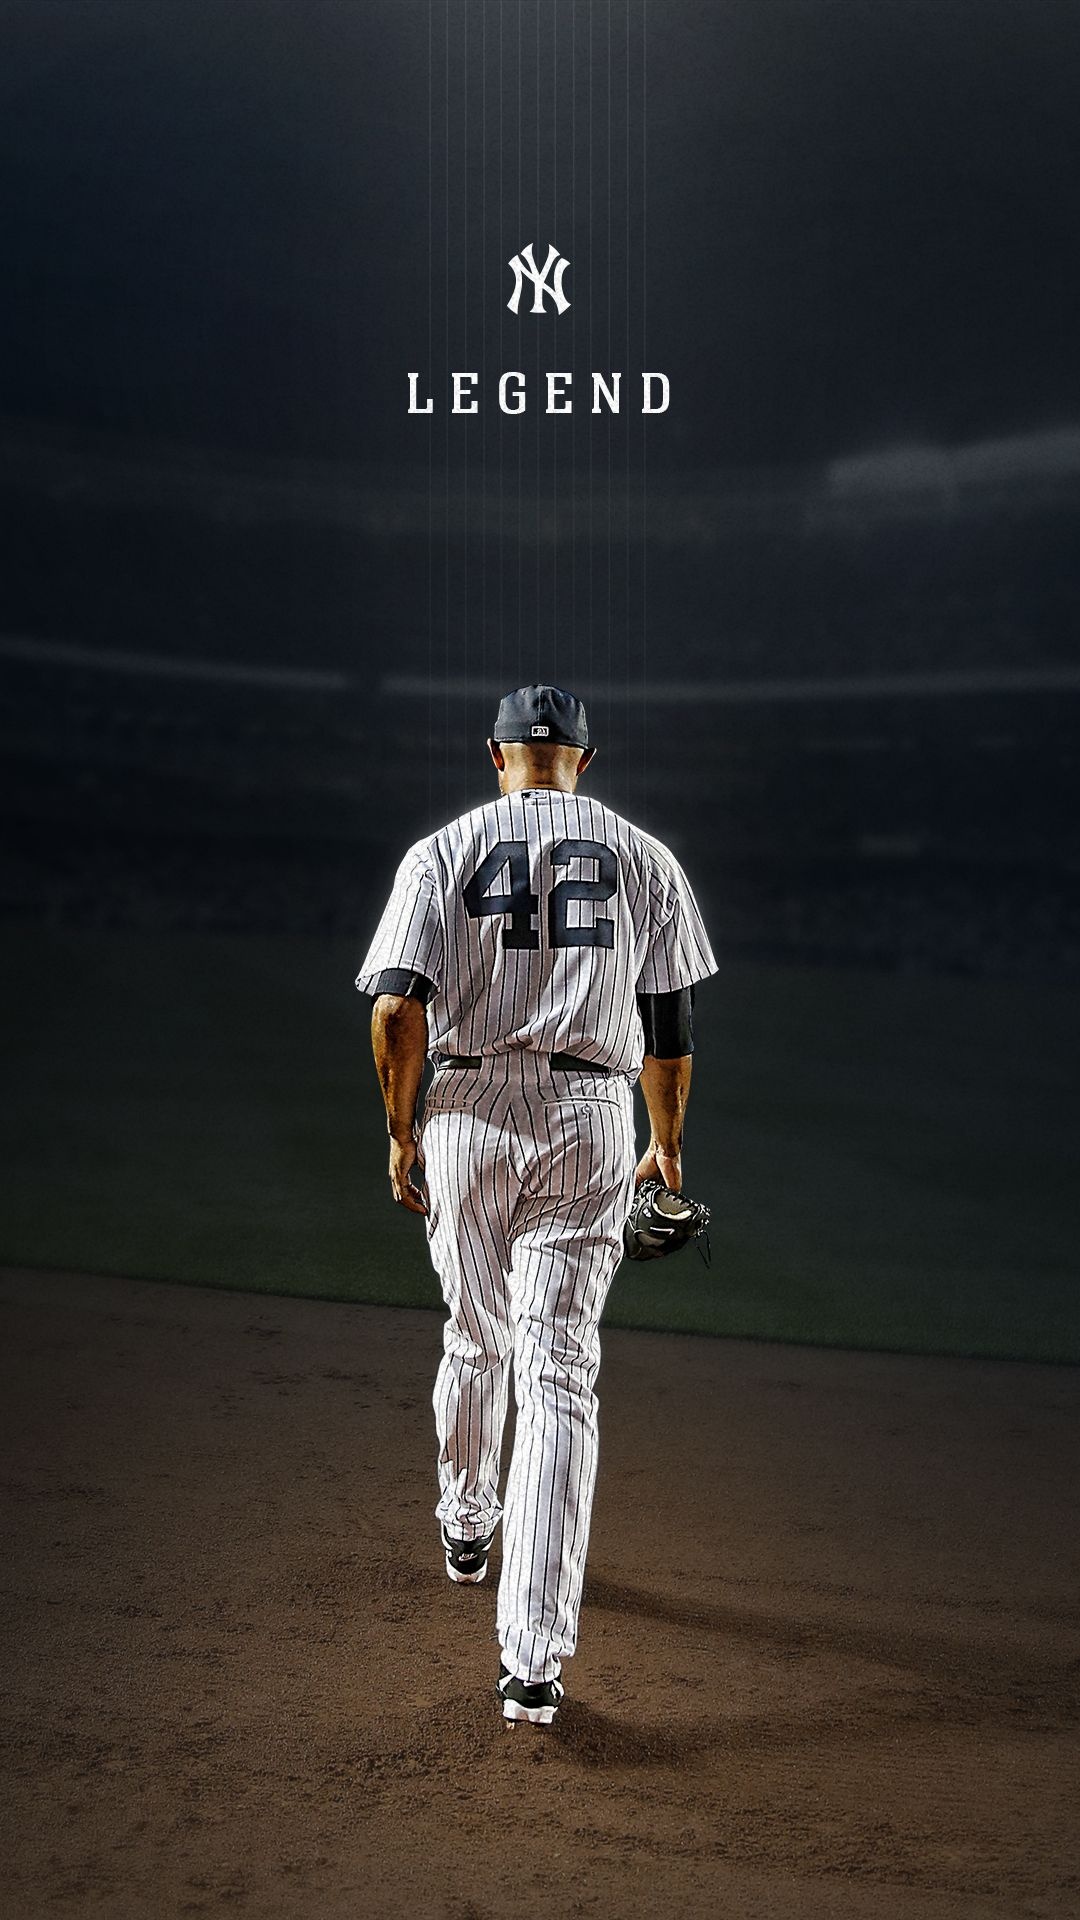 New York Yankees: Made World Series history by appearing in it 40 times. 1080x1920 Full HD Wallpaper.